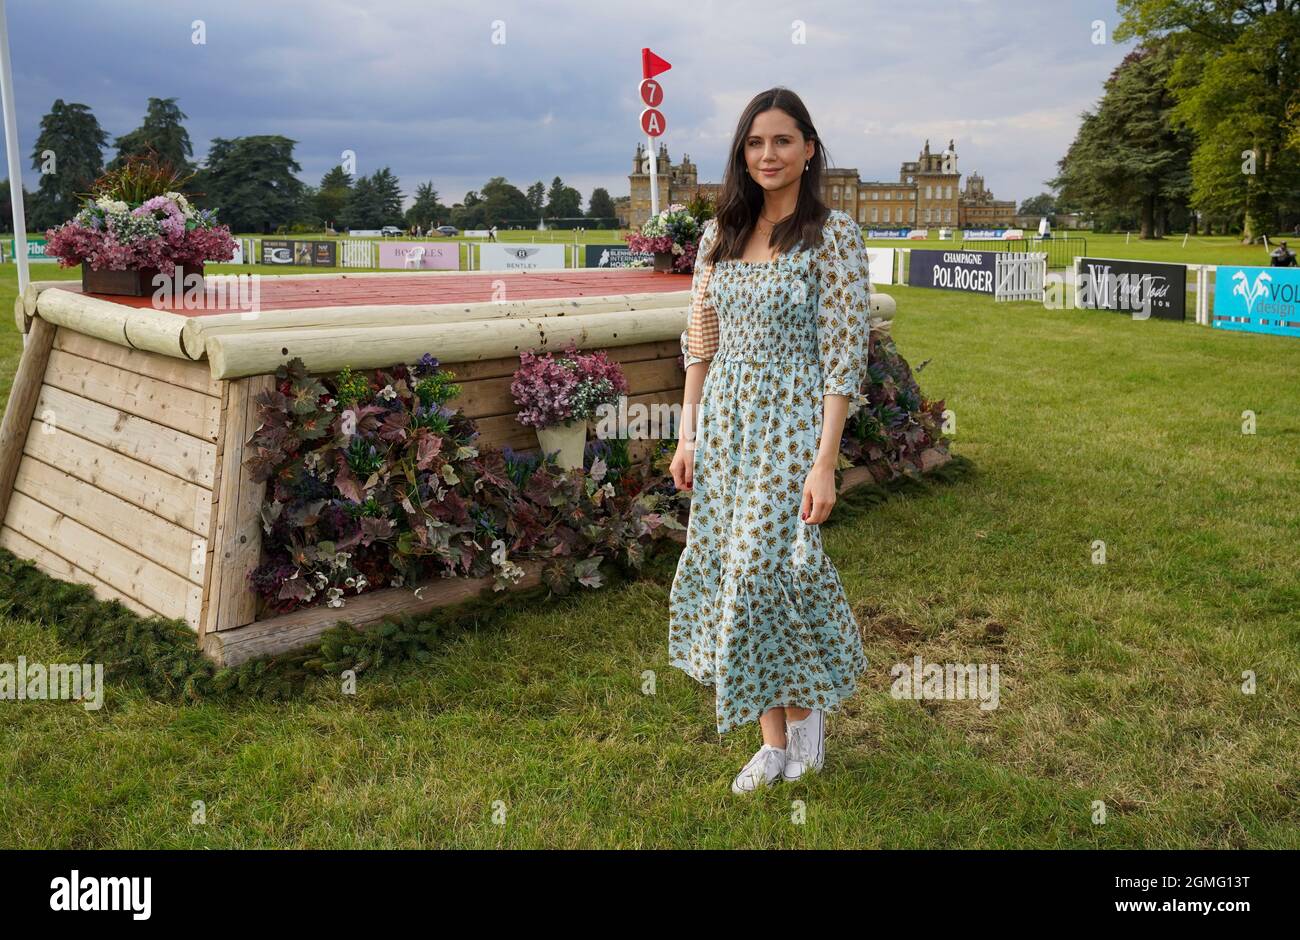 Oxford, UK, 18th September, 2021, Radio host and Model Lilah Parsons at the Blenheim Palace International Horse Trials Brought to you by The Jockey Club held in the grounds of Blenheim Palace, in the village of Woodstock near Oxford in UK between the 16-19th September 2021 Credit: Peter Nixon/Alamy Live News Stock Photo